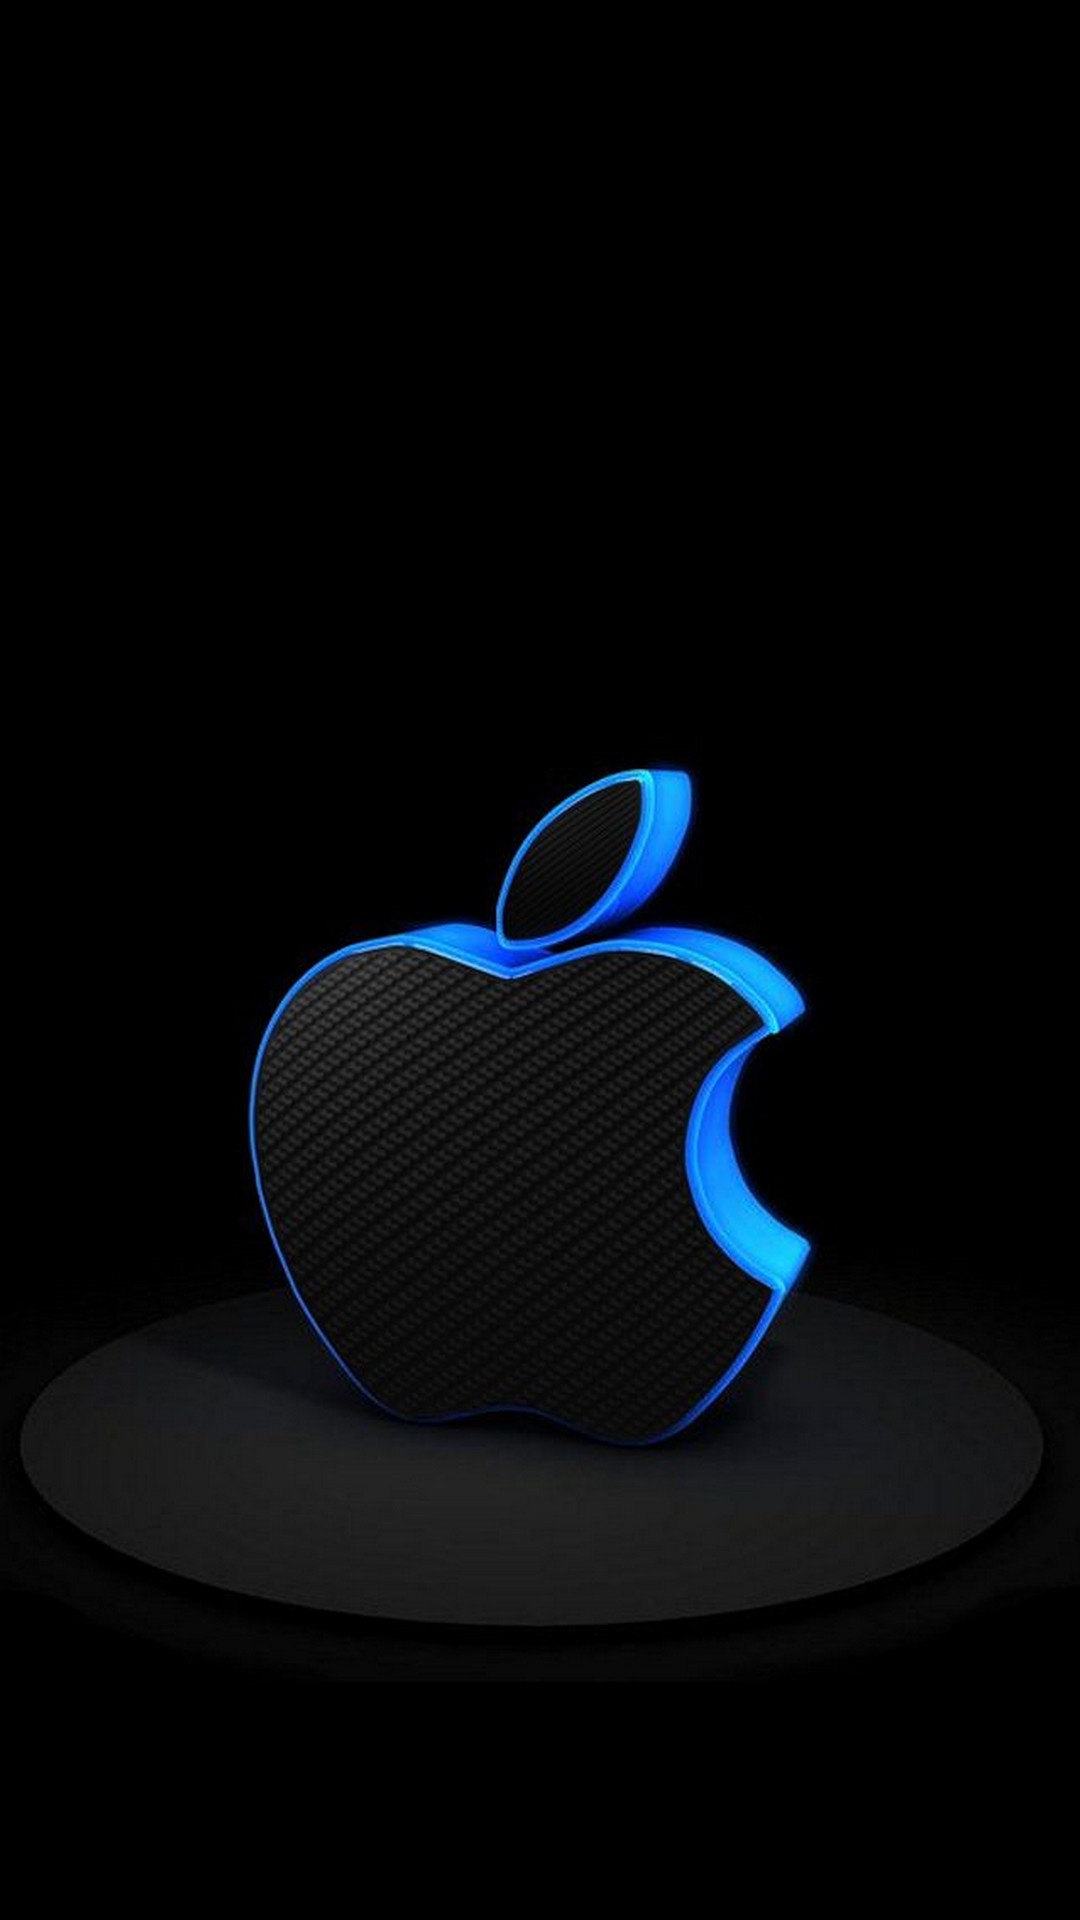 3d Wallpaper For Mobile Iphone Image Num 7